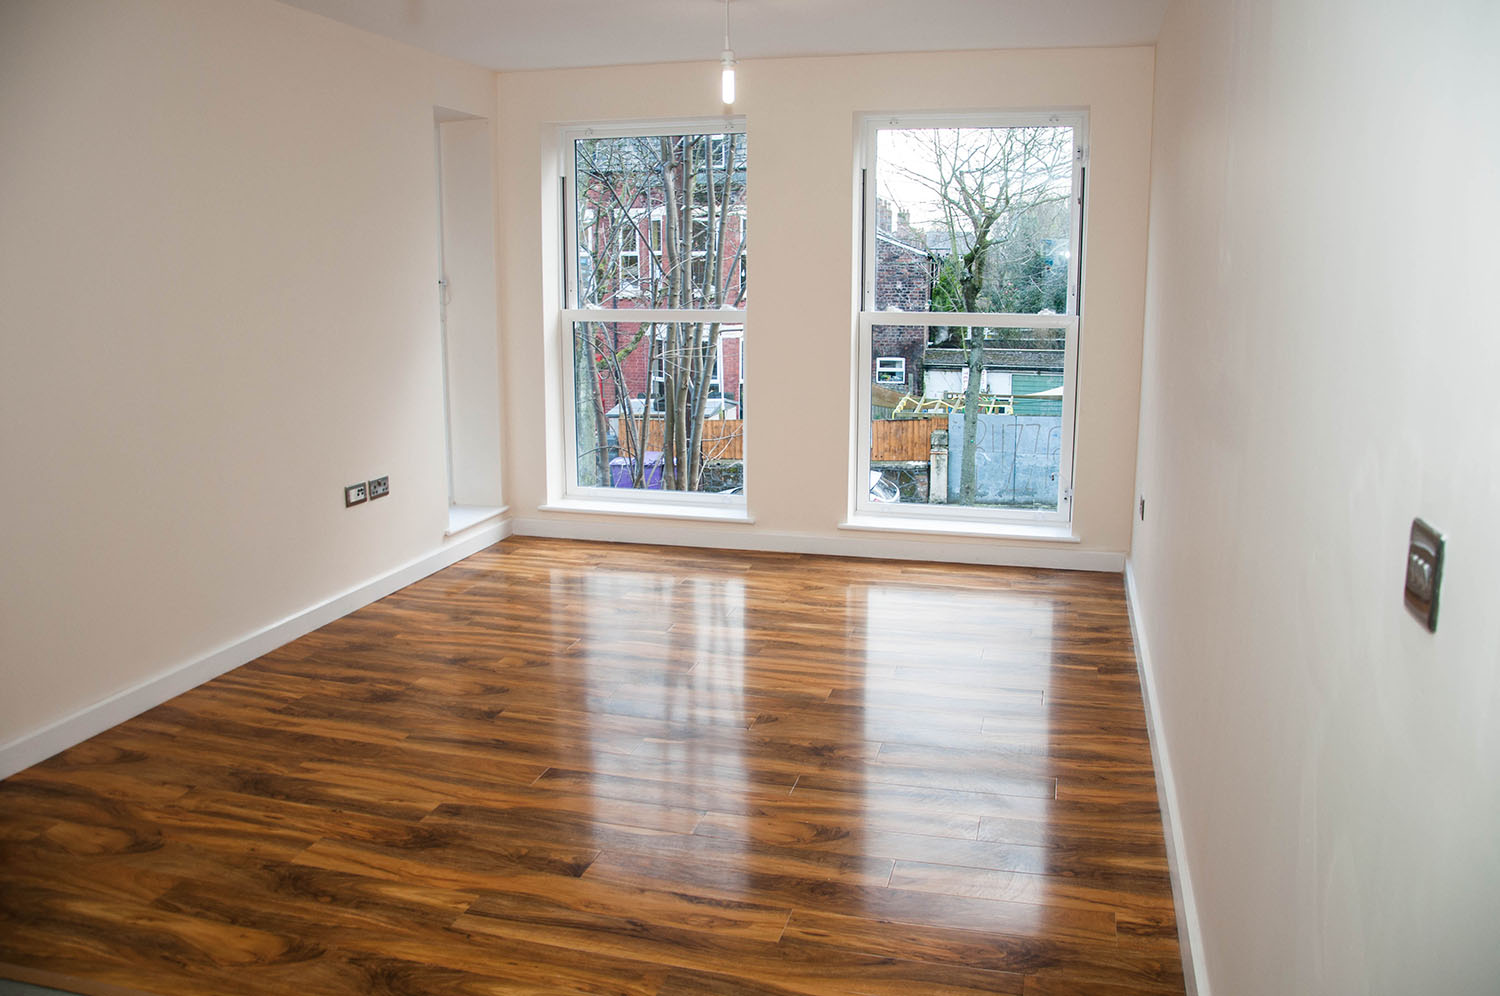 Empty bedroom with glossy wooden floors and 2 windows